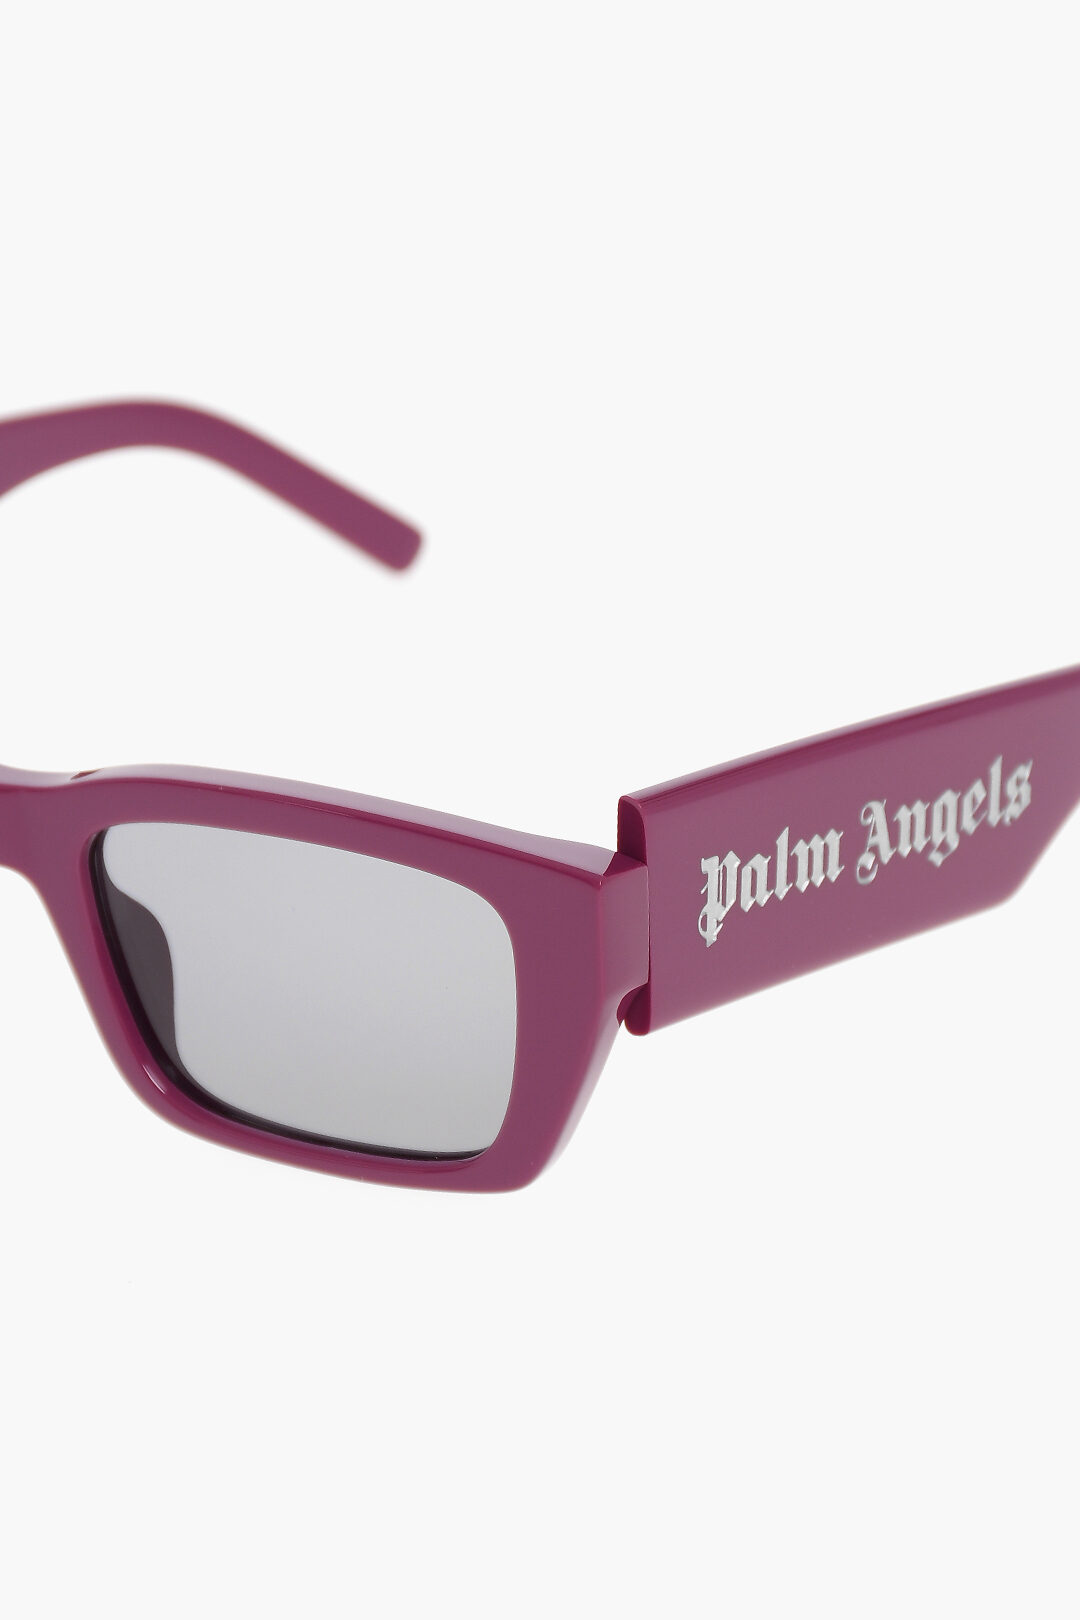 Palm Angels Solid Color Sunglasses with Squared Lenses unisex men women ...